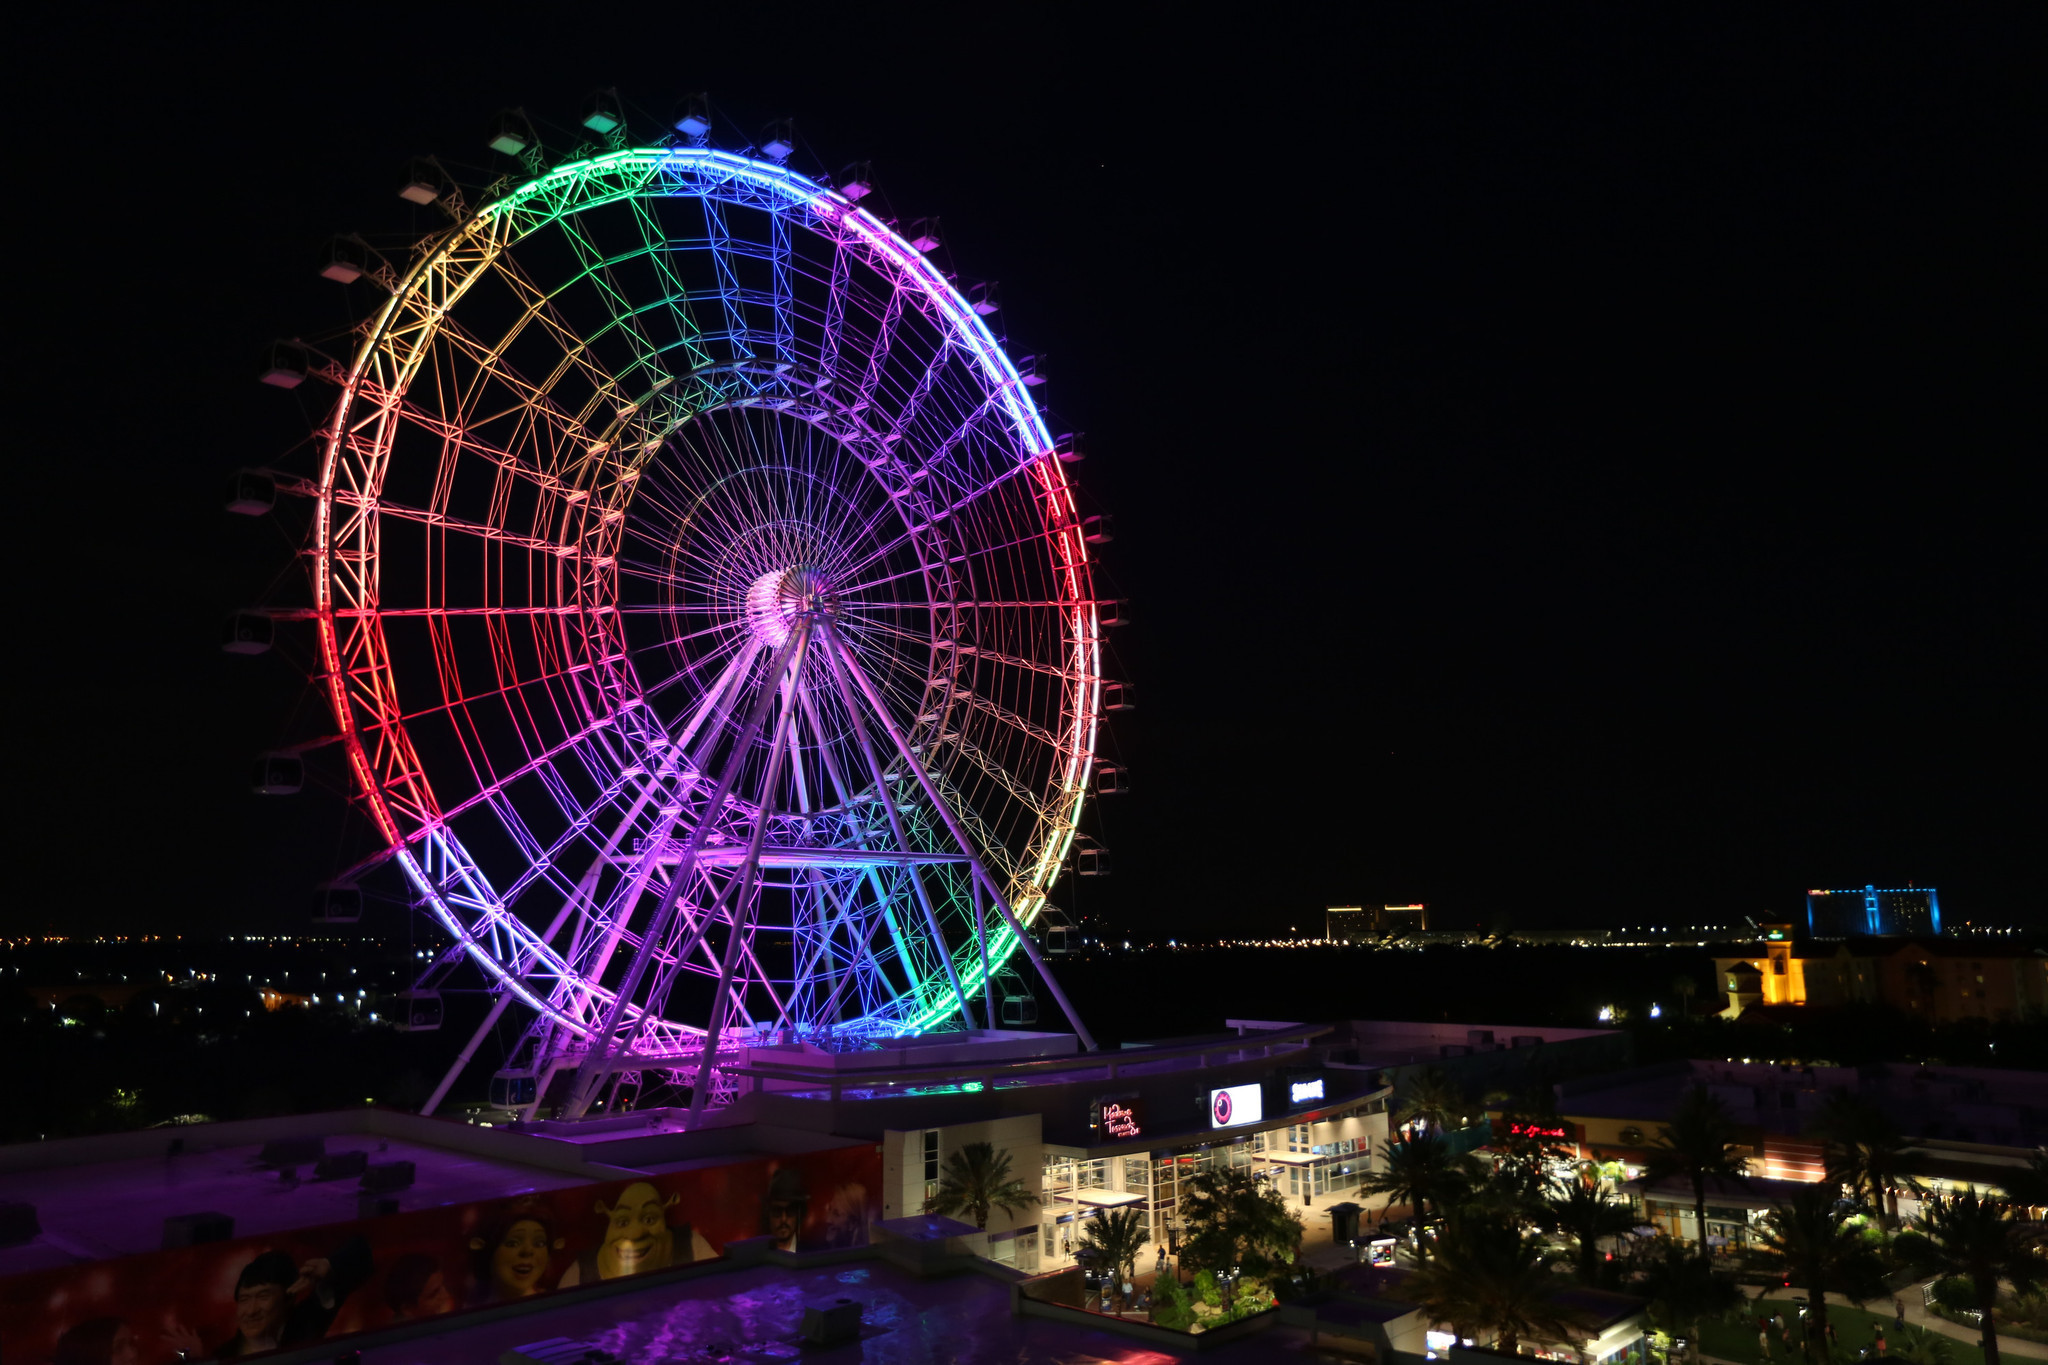 A night photo of the Coca-Cola Orlando Eye lit up in colors of the rainbow.